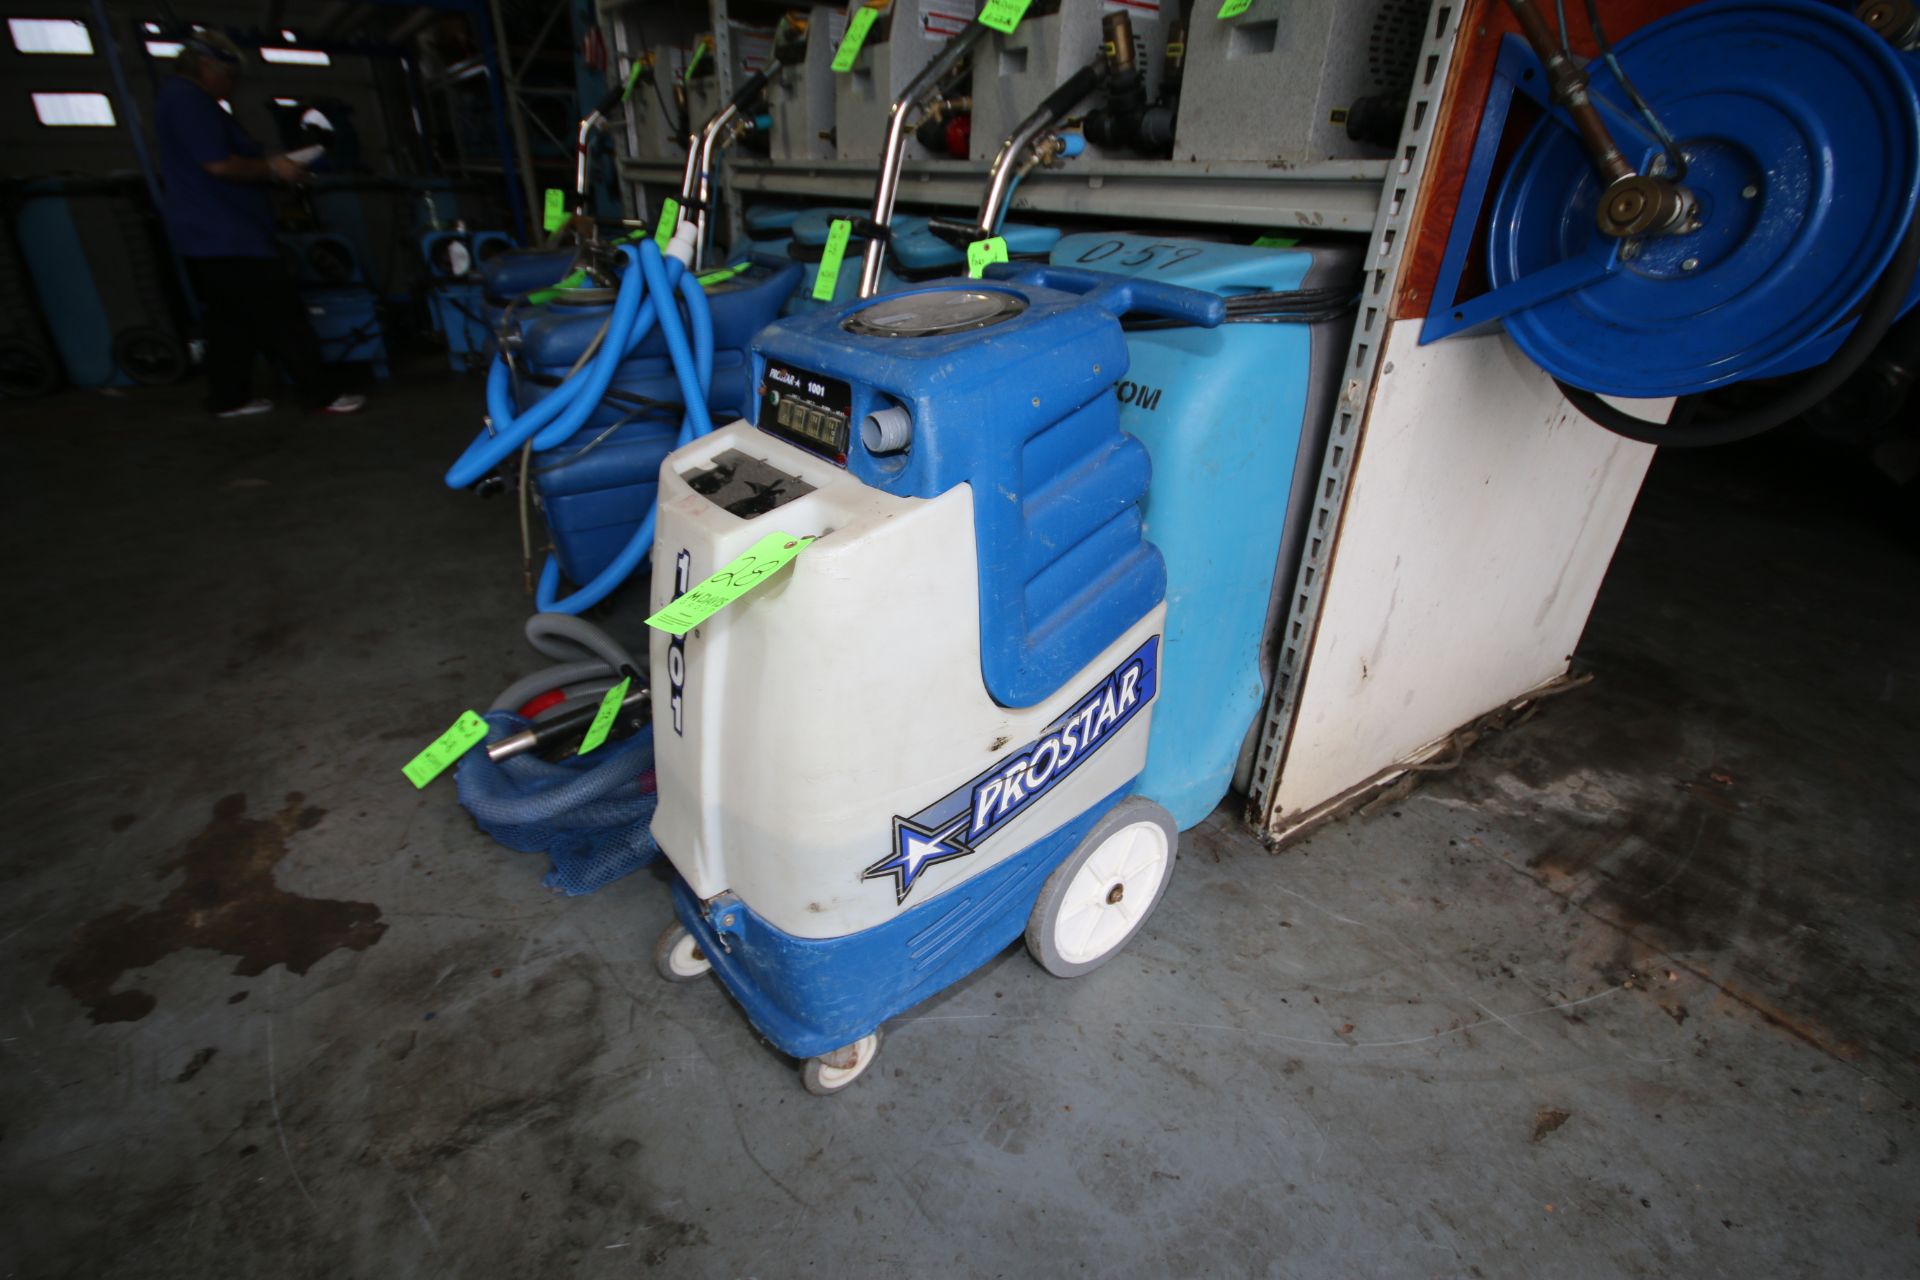 Prostar 1001 Carpet Scrubber/Extractor with (3) Wands and Hoses - Image 2 of 2